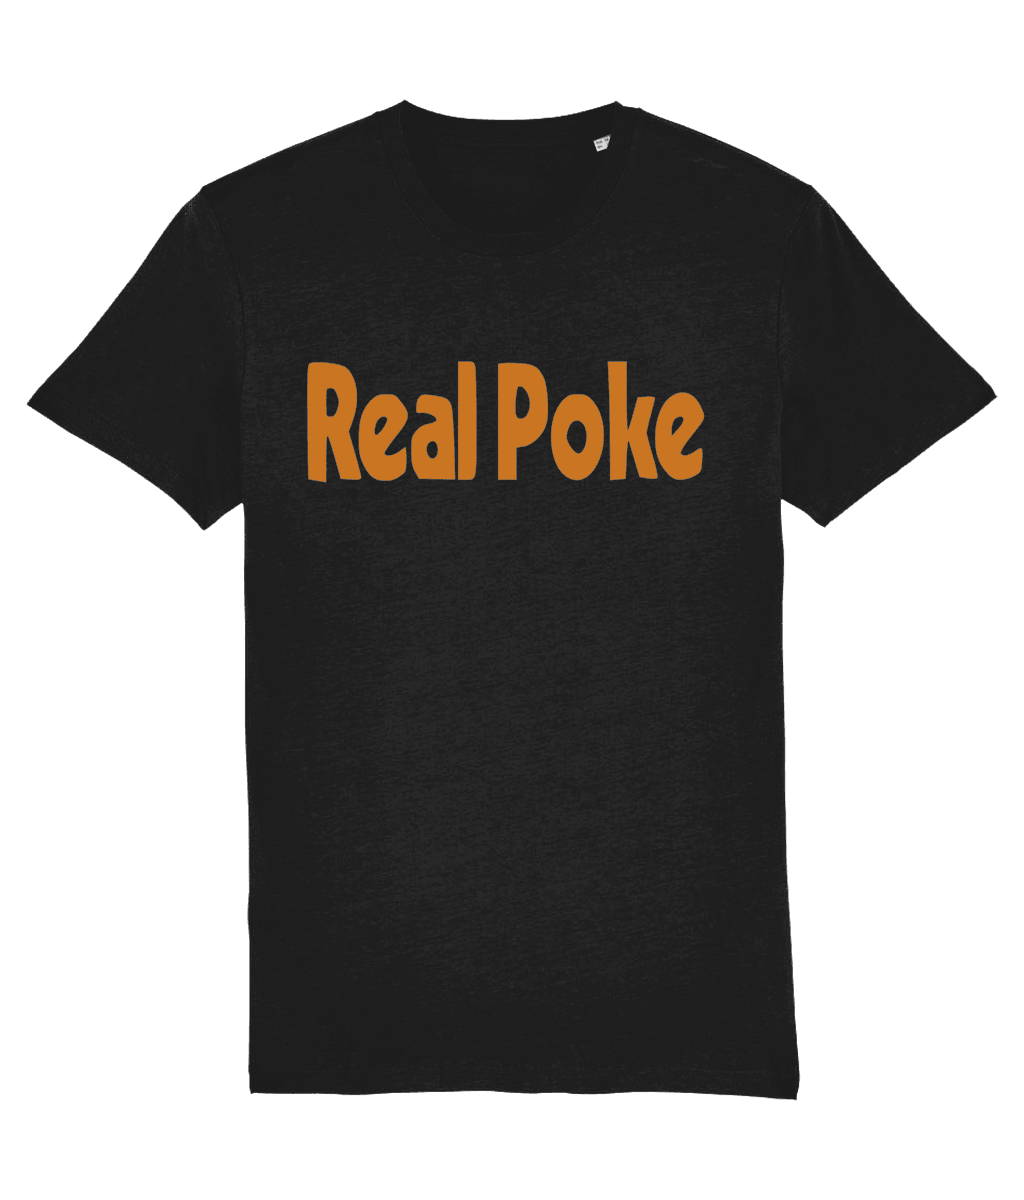 REAL POKE: T-Shirt Inspired by Lambretta GP Adverts (4 Colour Options) Small to 4XL - SOUND IS COLOUR